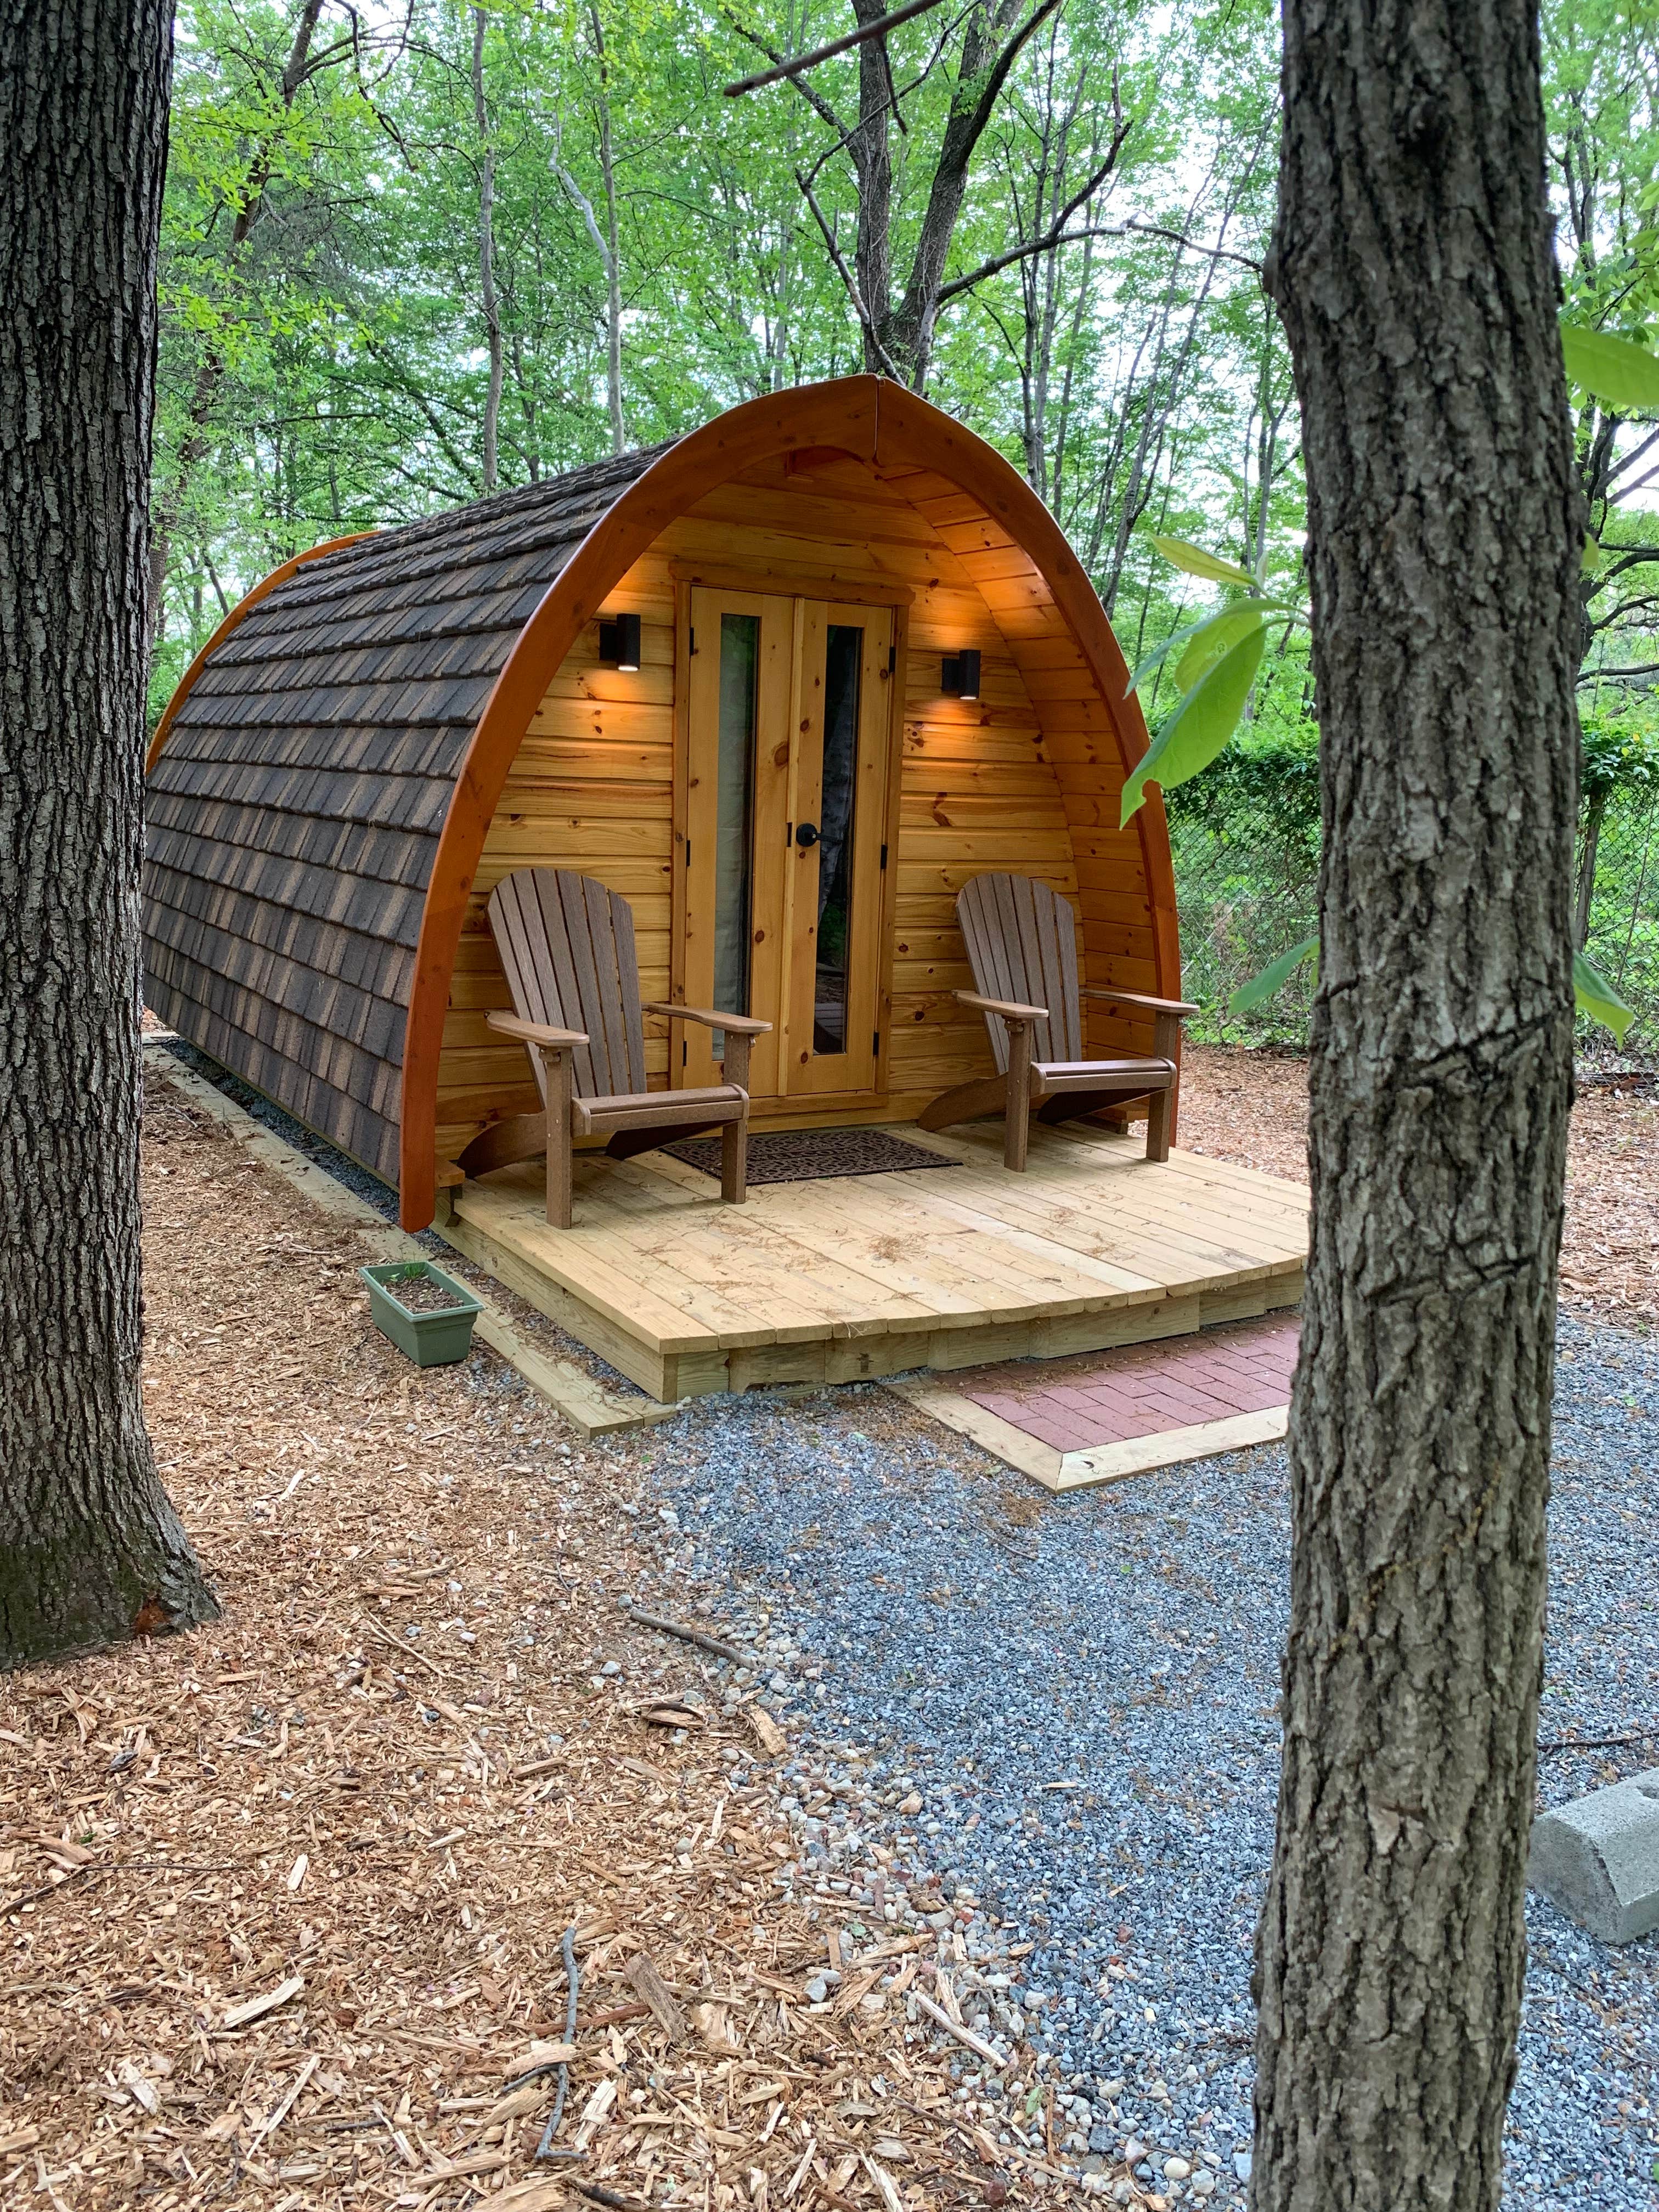 Cabins are available at the Cherry Hill Park